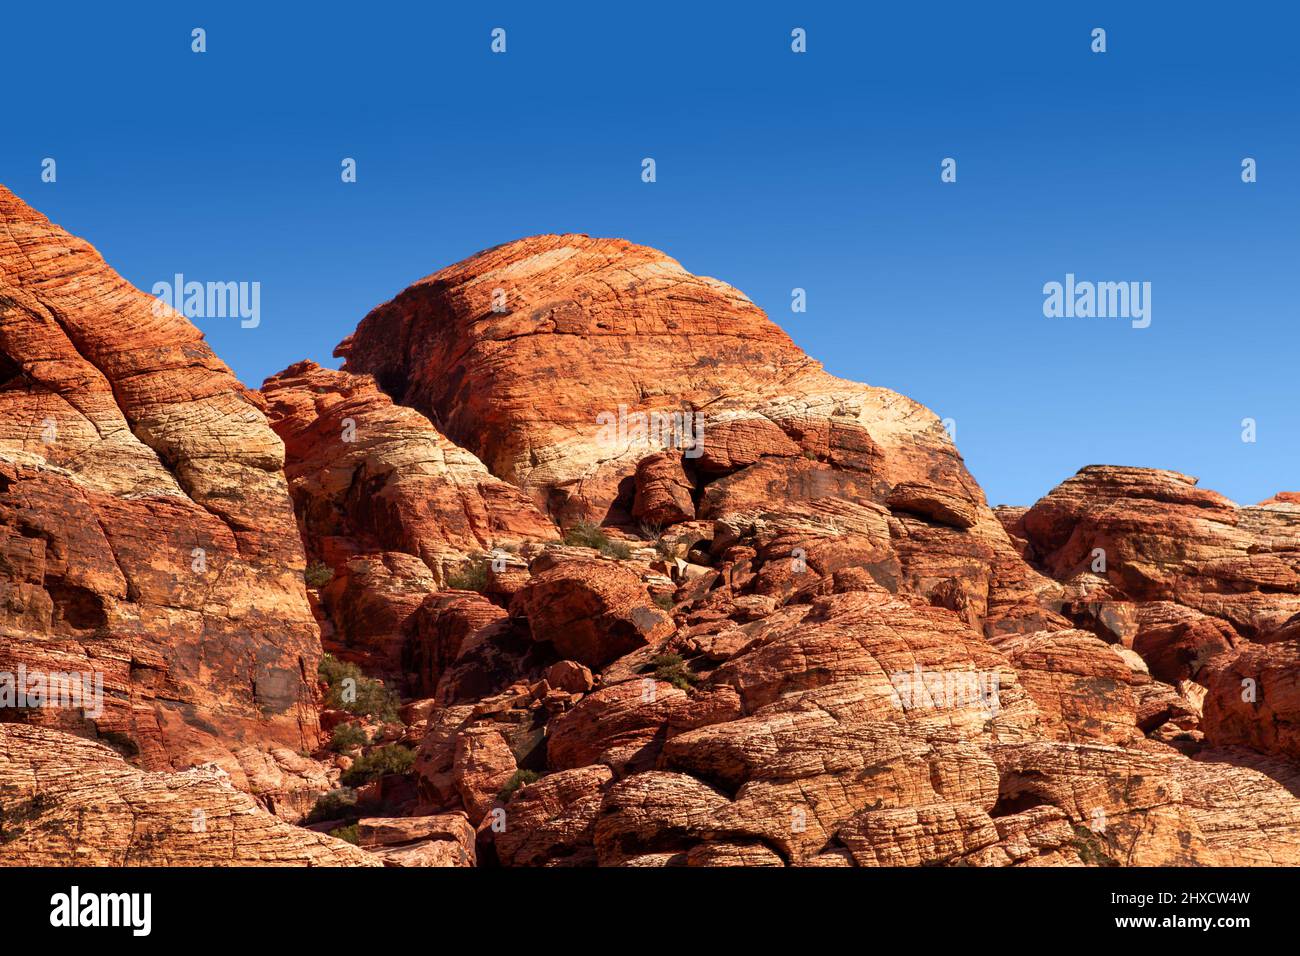 Close view of Rock formation in Red Rock Canyon, Nevada Stock Photo